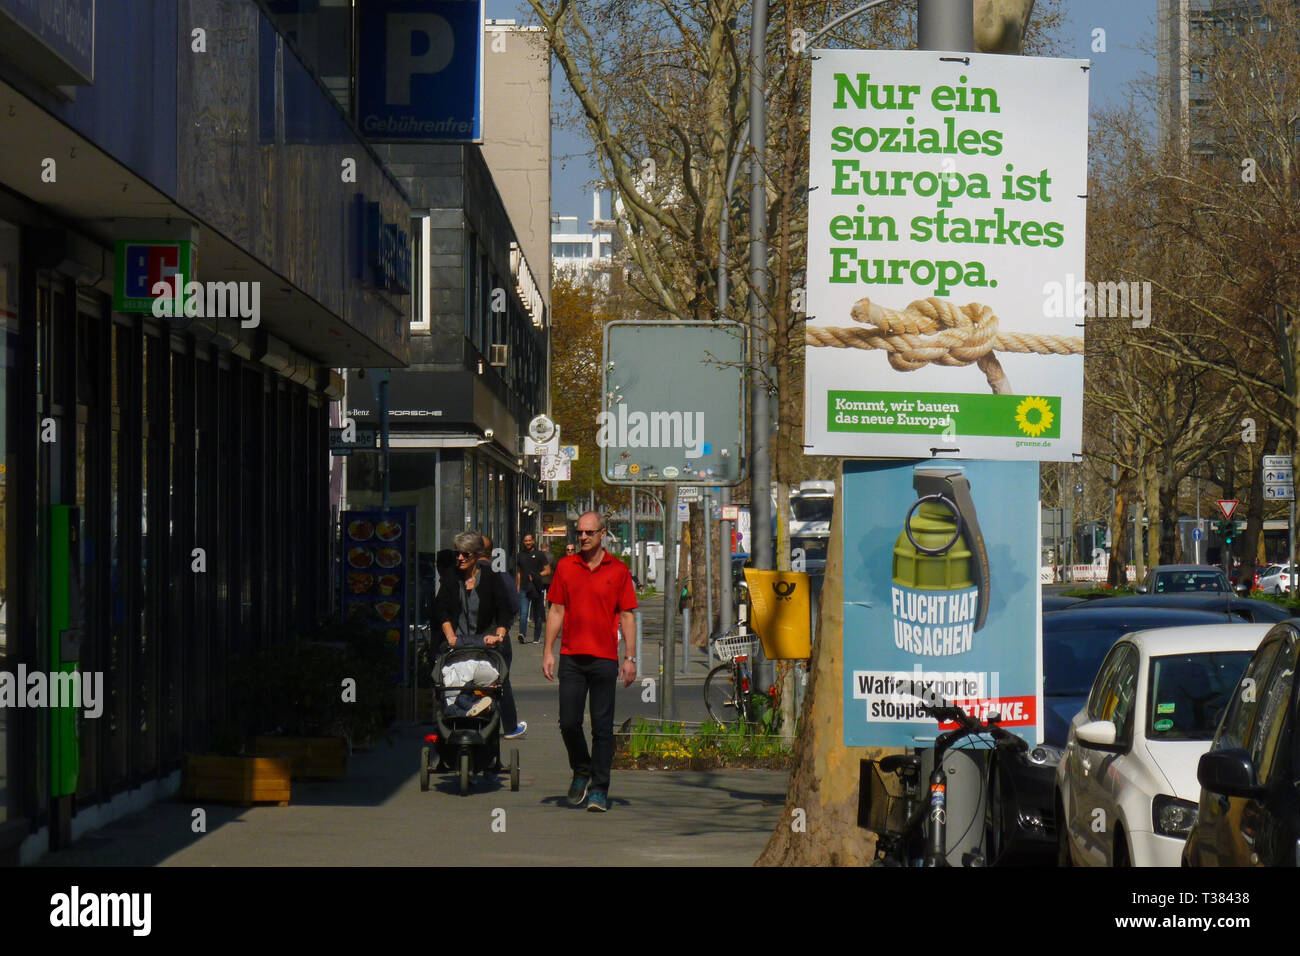 Berlin,  Germany. 7th Apr, 2019. Election posters of Alliance 90/The Greens (German: BÃ¼ndnis 90/Die GrÃ¼nen or GrÃ¼ne) and The Left Party (German: Die Linke) can be seen. From 23 to 26 May 2019, citizens of the European Union will be able to elect the European Parliament for the ninth time. In the Federal Republic of Germany, the election will take place on 26 May 2019. Credit: Jan Scheunert/ZUMA Wire/Alamy Live News Stock Photo